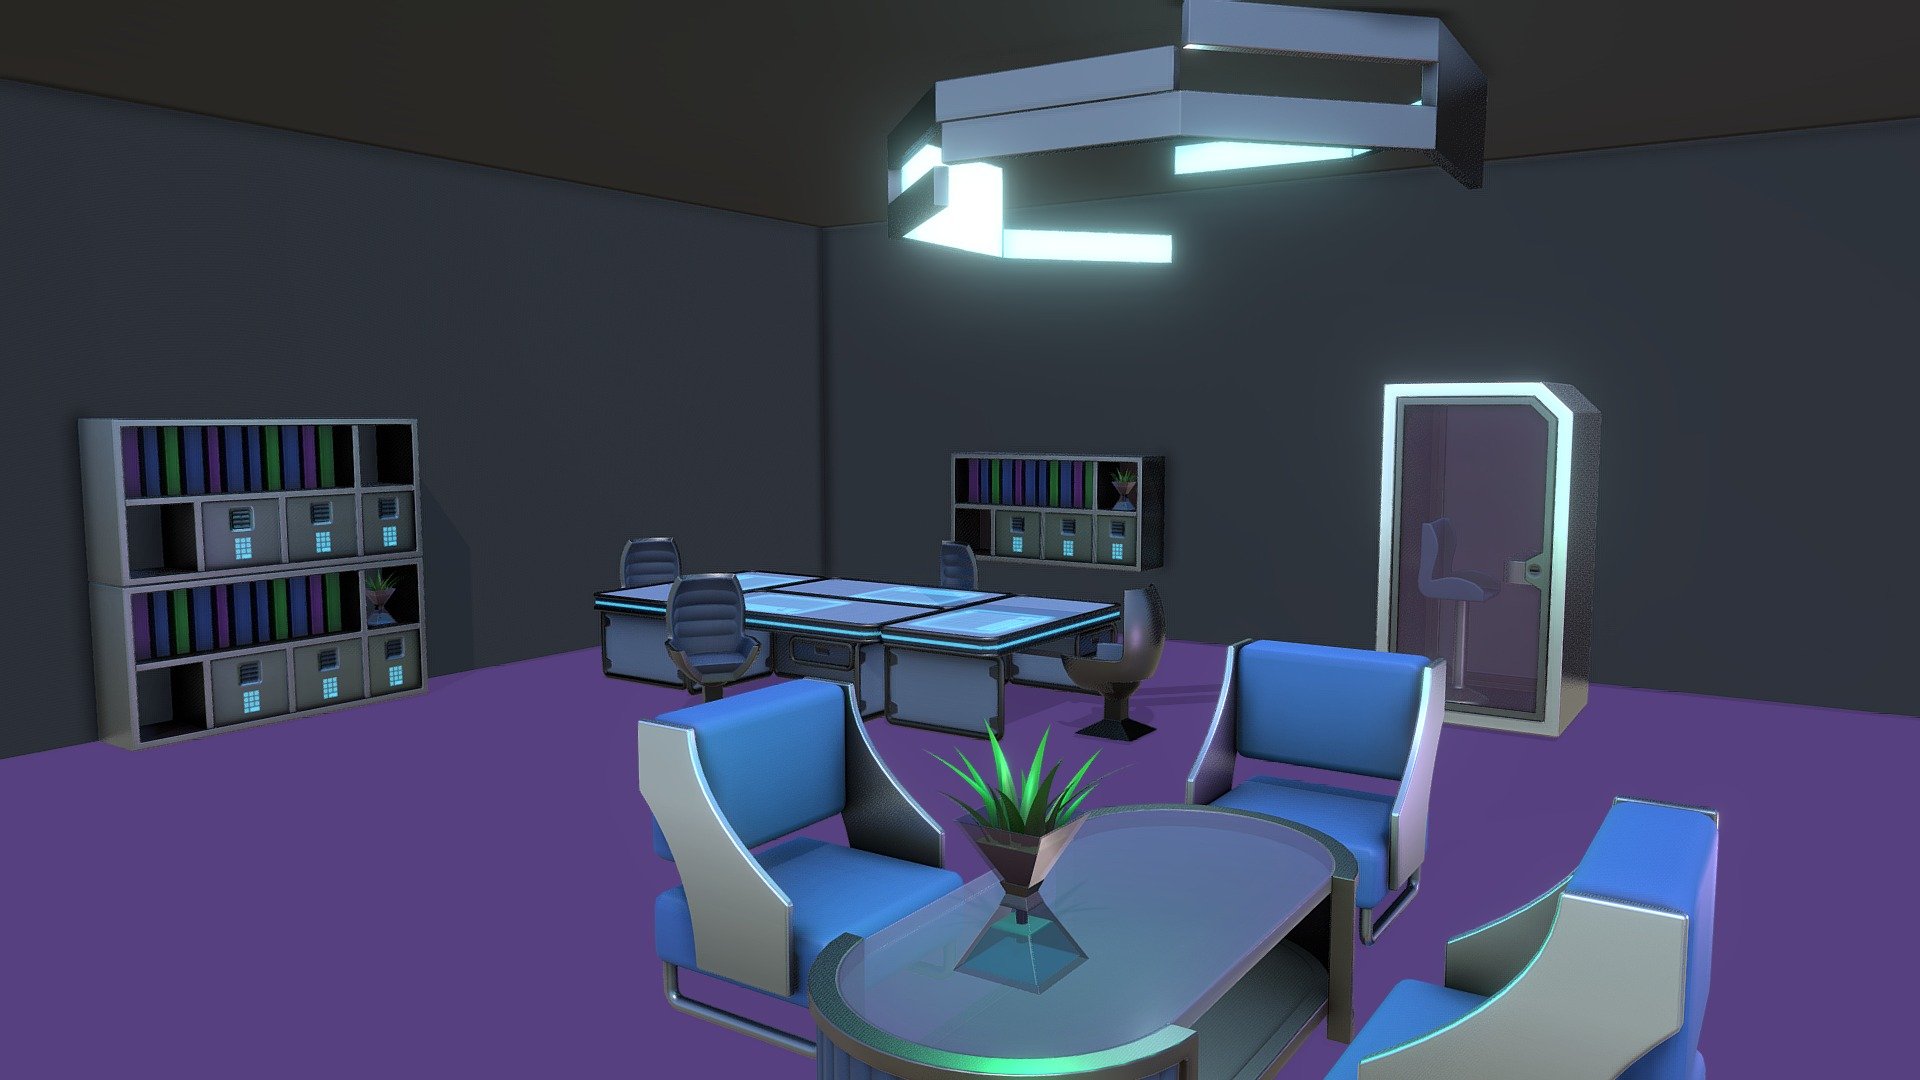 A demo scene of Futuristic Workspace assets [** INDIVIDUAL TEXTURE SETS of 1024 x 1024 ** ]

Complete pack with all assets on a single texture set ( Atlas ) here: https://skfb.ly/oDGyz

**This pack includes: **




Armchair

Silent Cabin

Coffee Table

Holo-Desk

Modern Lamp

Plantpot

Shelf

Workchair

The Demo Scene

8 assets with individual texture sets of 1024 x 1024 - Futuristic Workspace Demo Scene - Buy Royalty Free 3D model by Alex Andreu (@alexandreu3d) 3d model